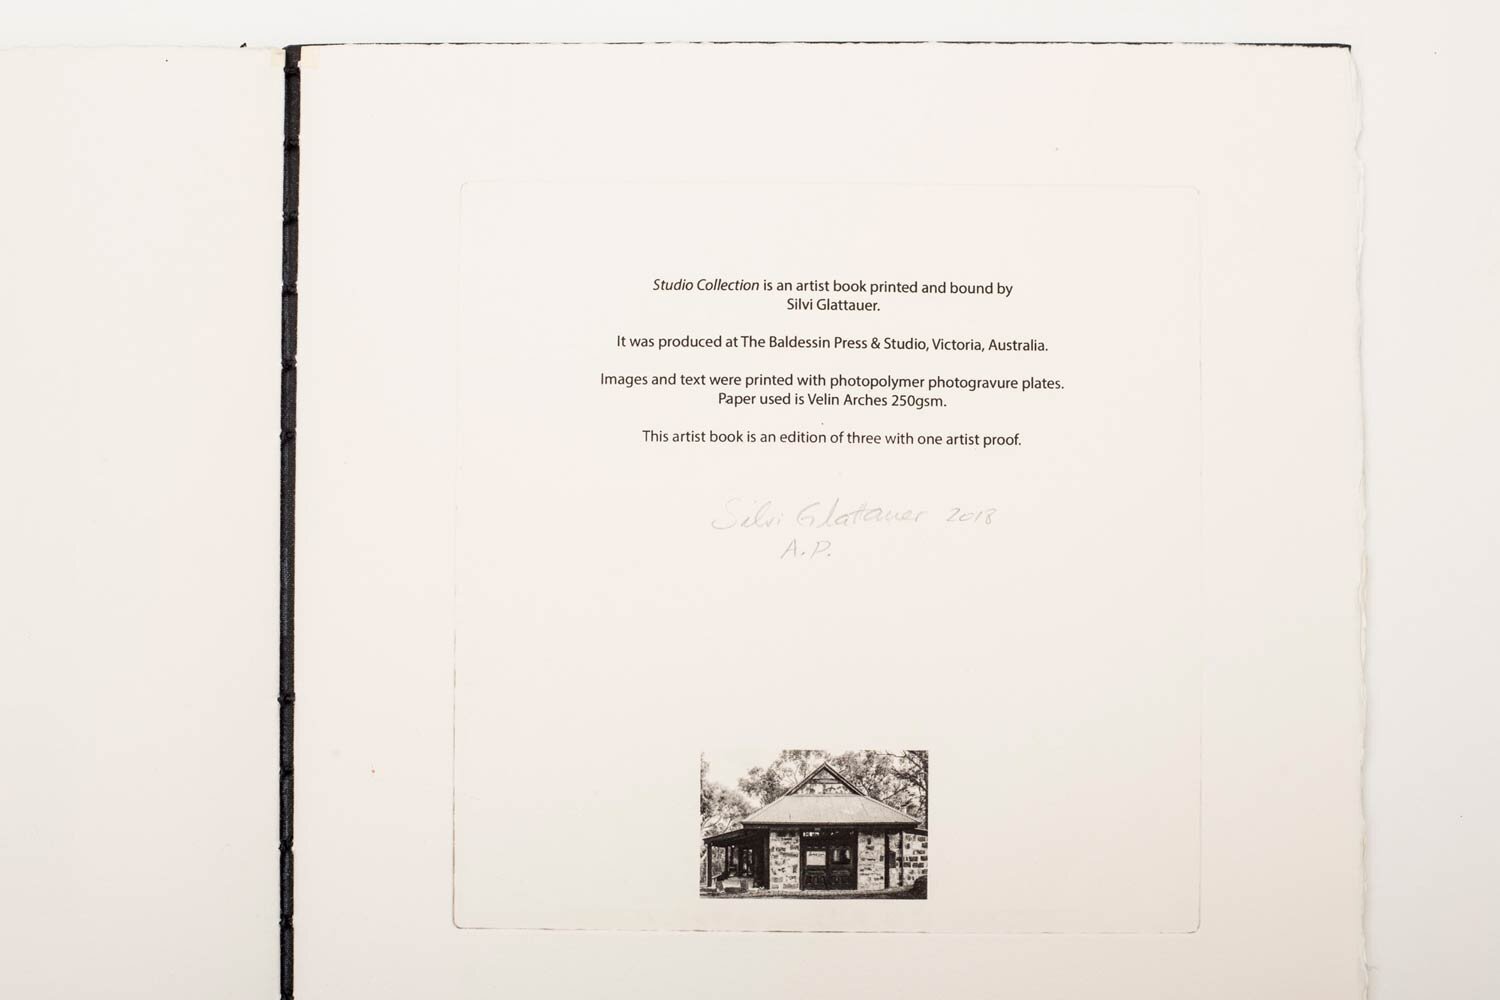 'Studio-Collection'-Artist-Book-29-x-29-x-20-cm.-Edition-of-3-with-one-artist-proof-7.jpg